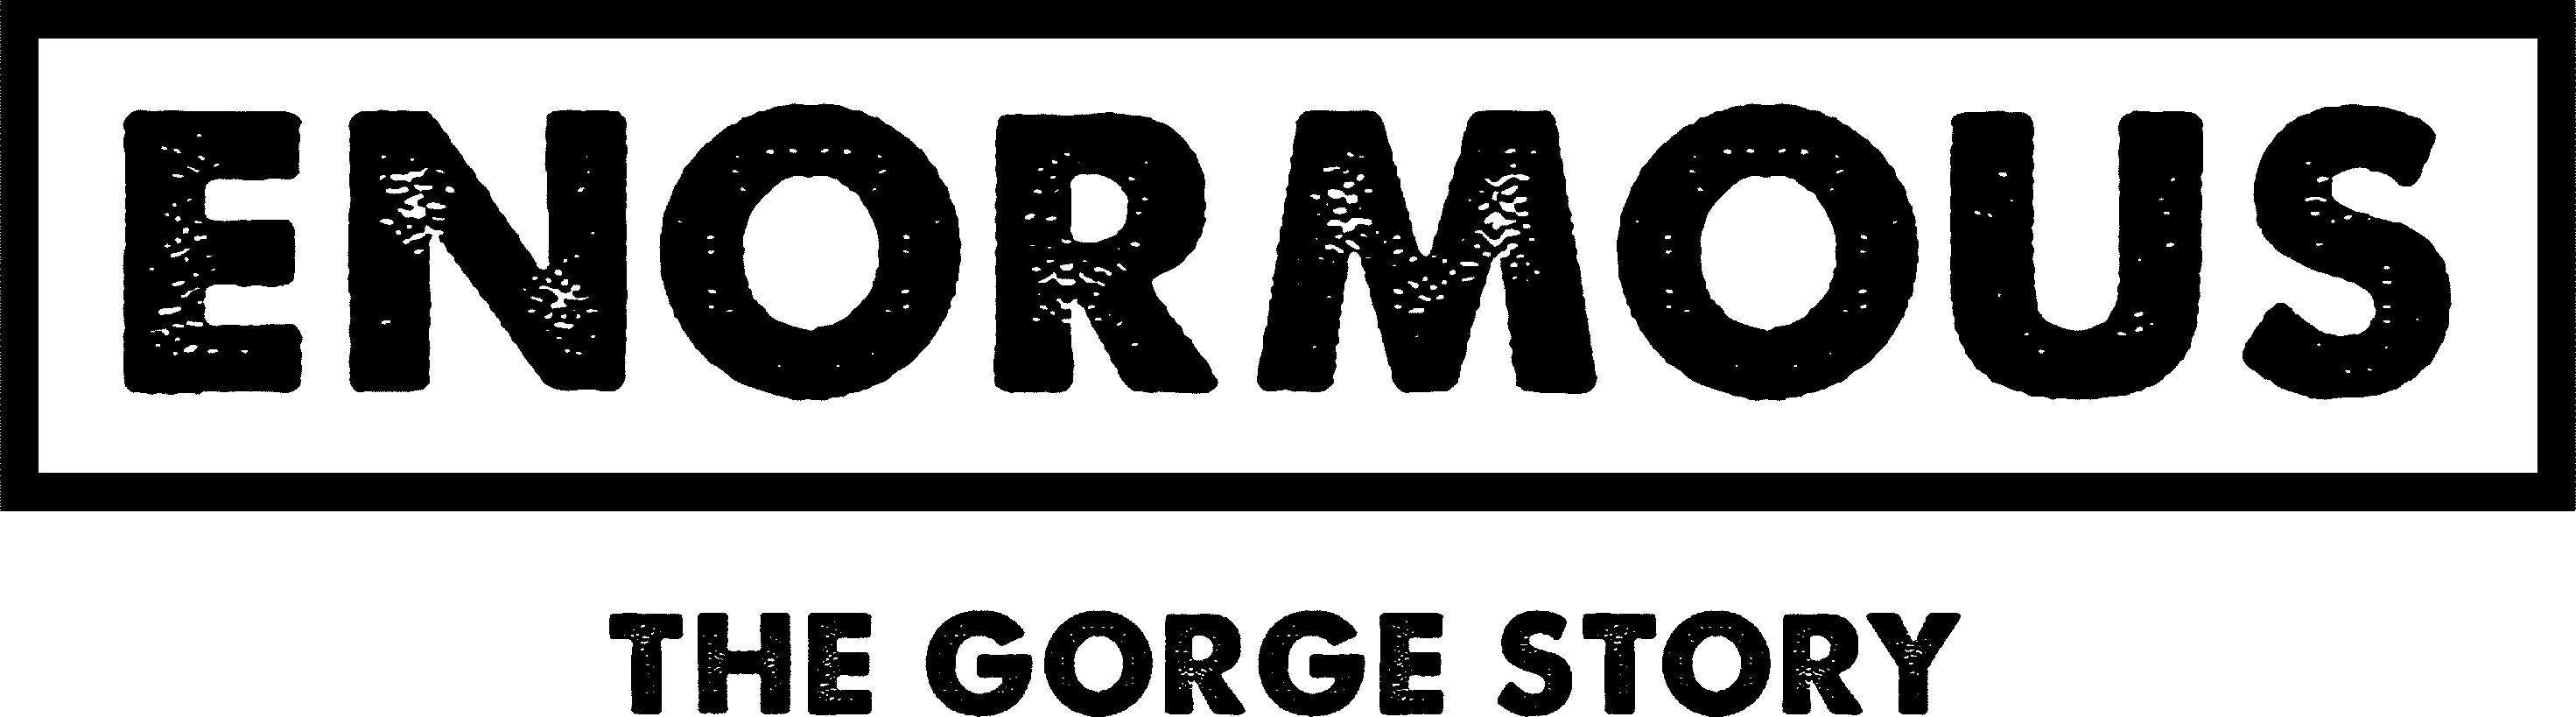 Enormous: The Gorge Story logo